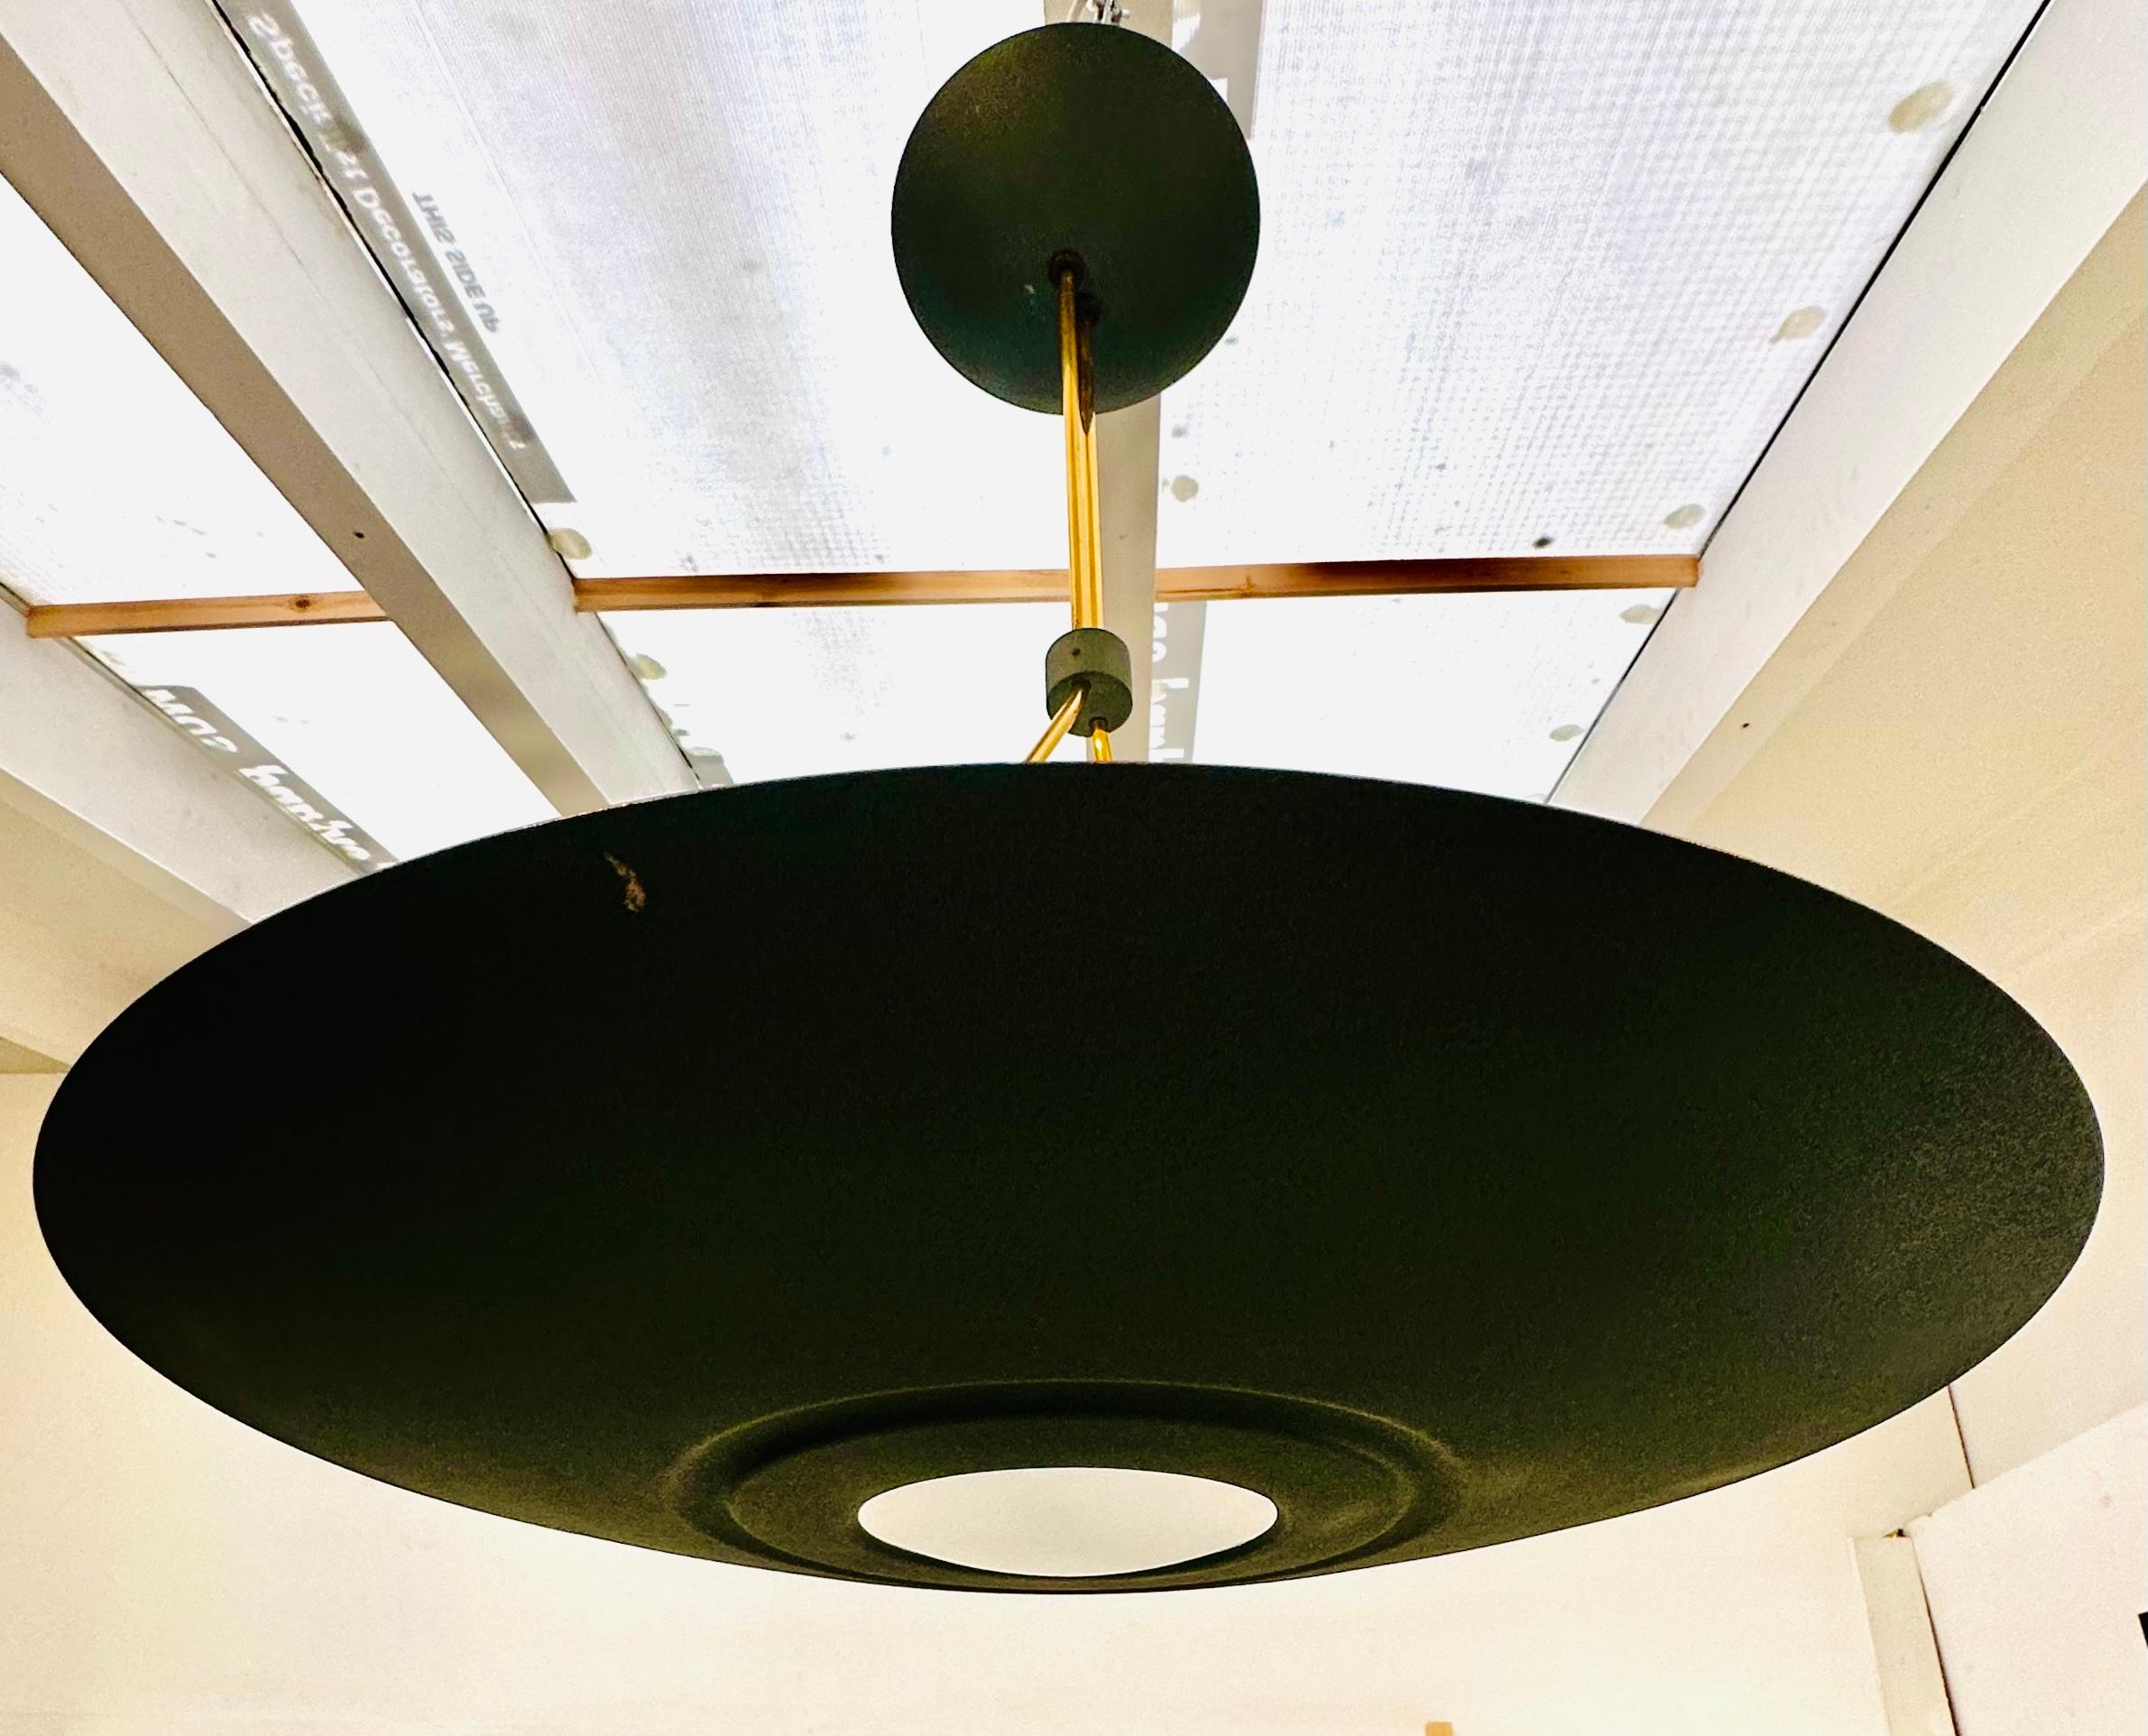 1980s Vintage French LG Paris UFO Space Age Halogen Ceiling Pendant Uplighter In Good Condition For Sale In London, GB